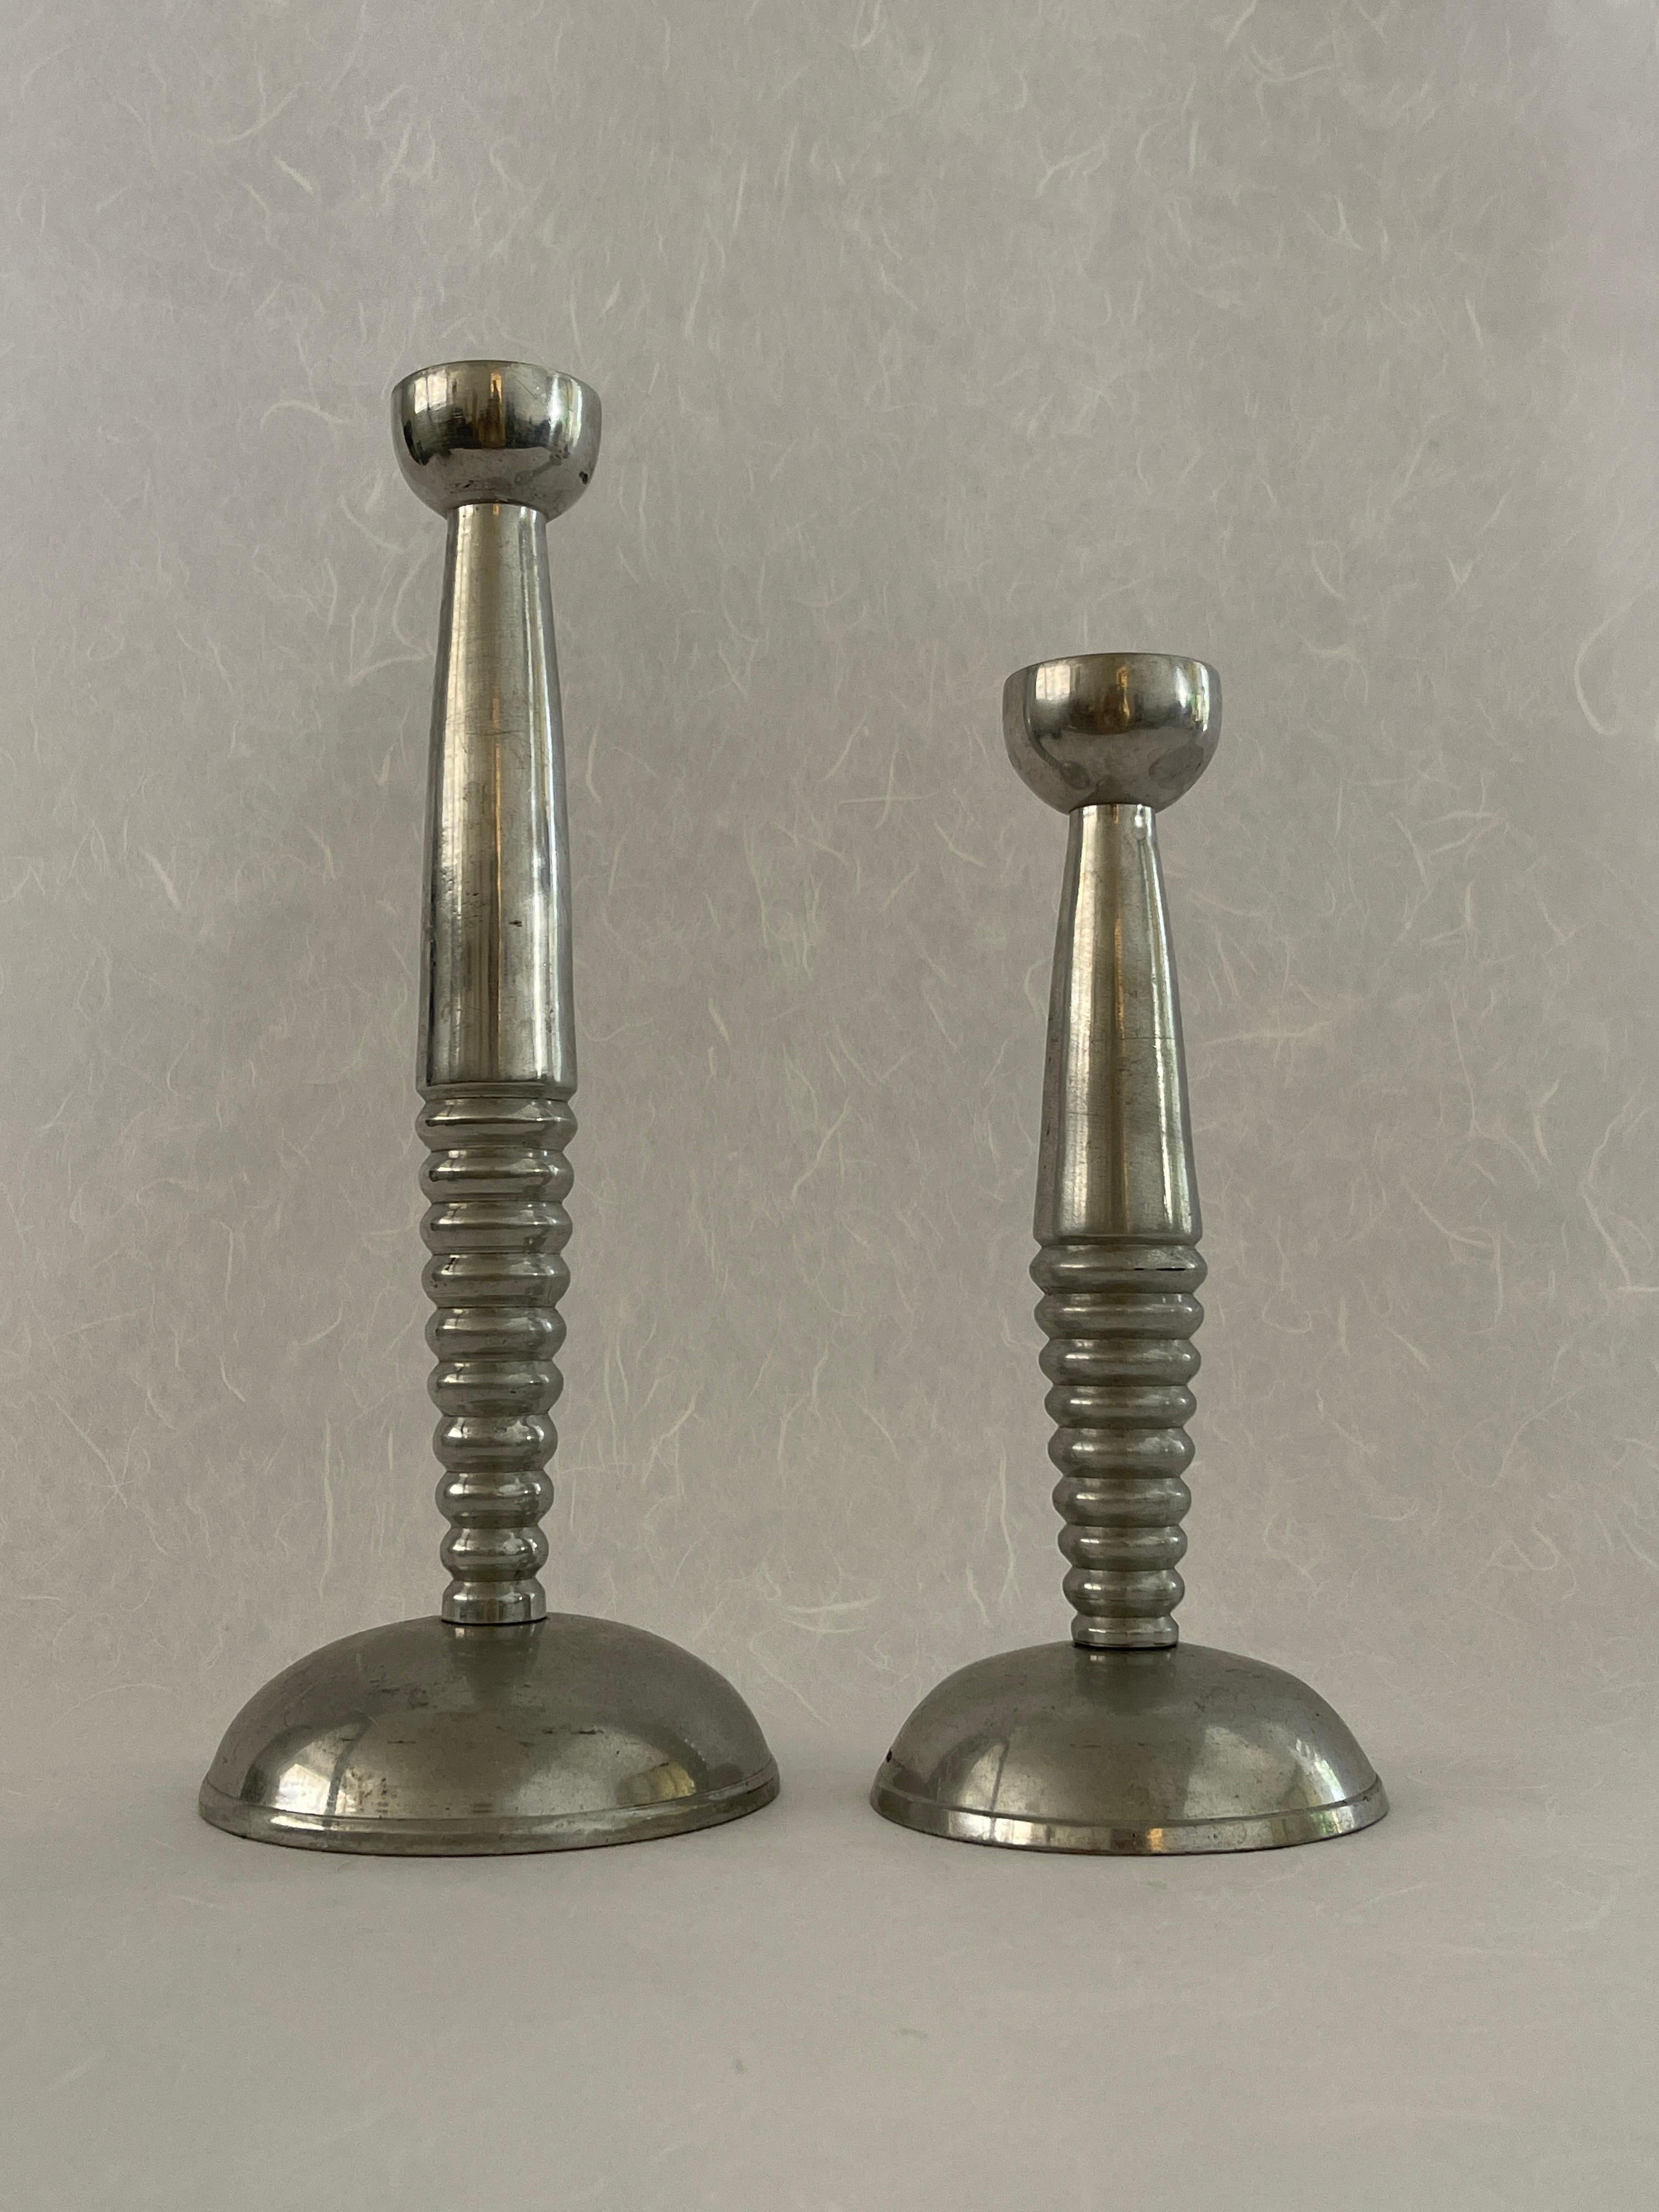 20th Century Space Age Silver Candle Stick Holders with a wide a circular base and a half ribbed shaft and fluted top. Great design with a good heavy weight. Sold as a pair. Two different sized holders. 